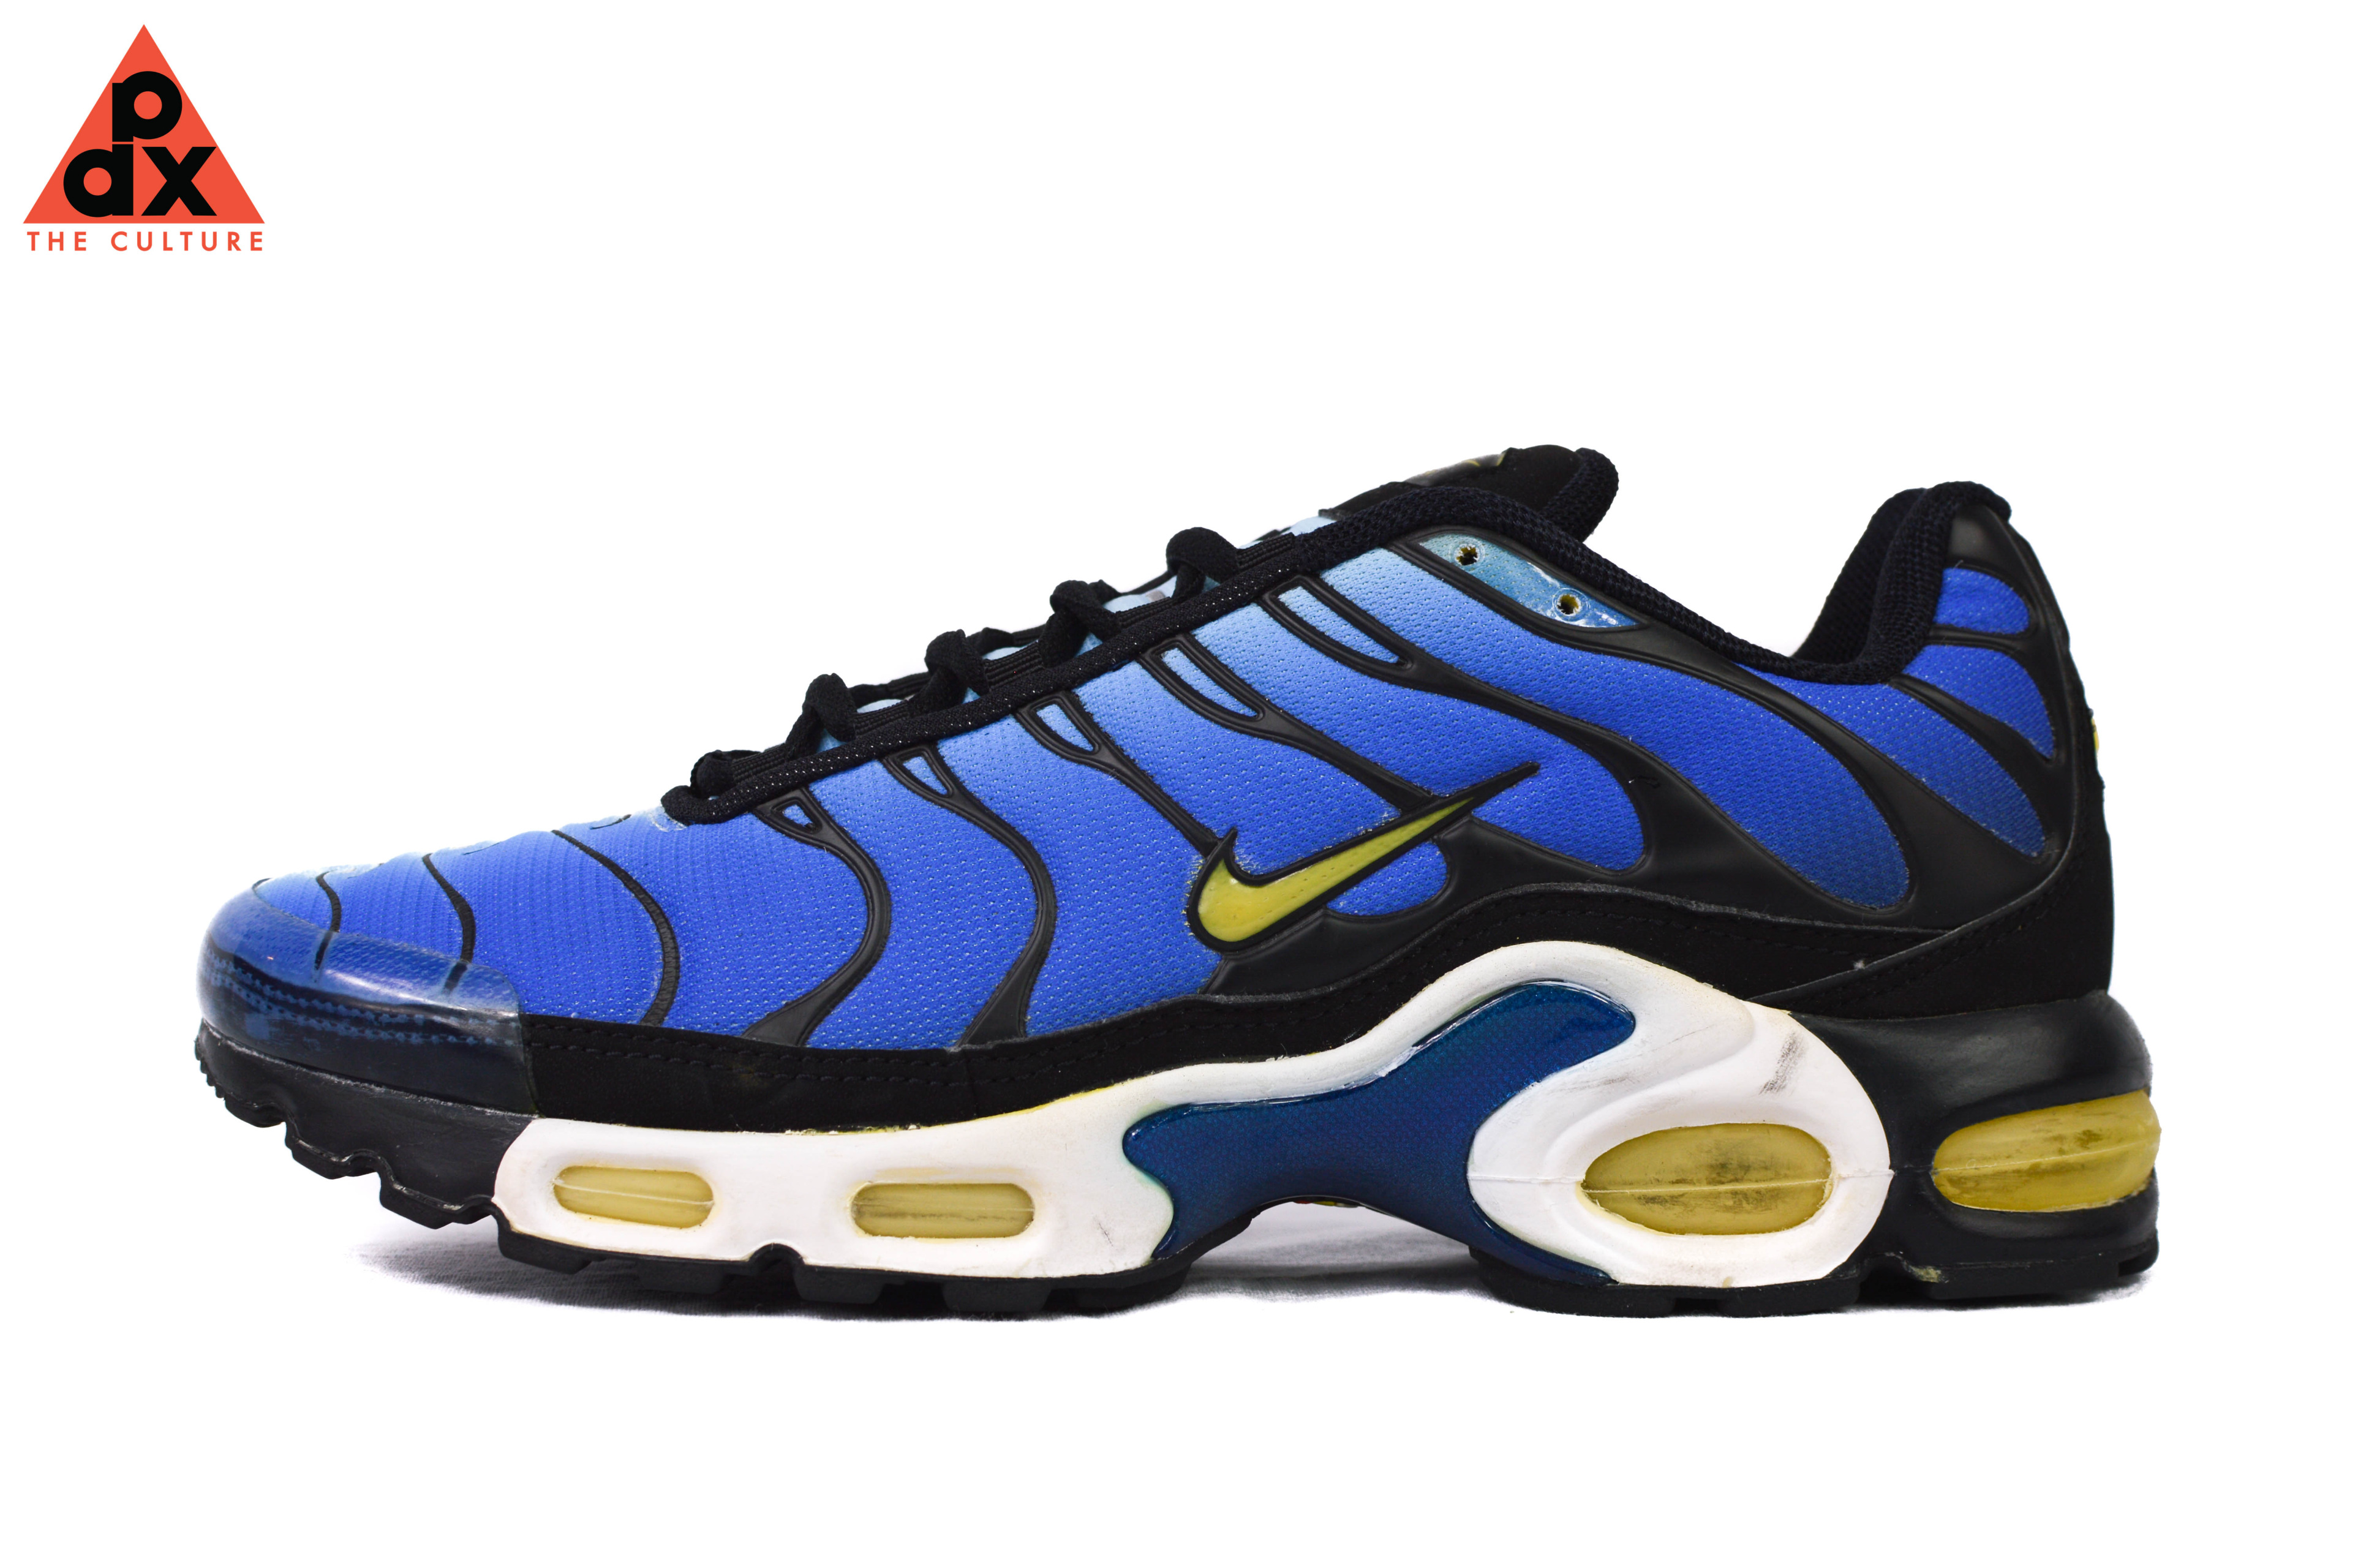 1998 air max plus,Save up to 19%,www.ilcascinone.com